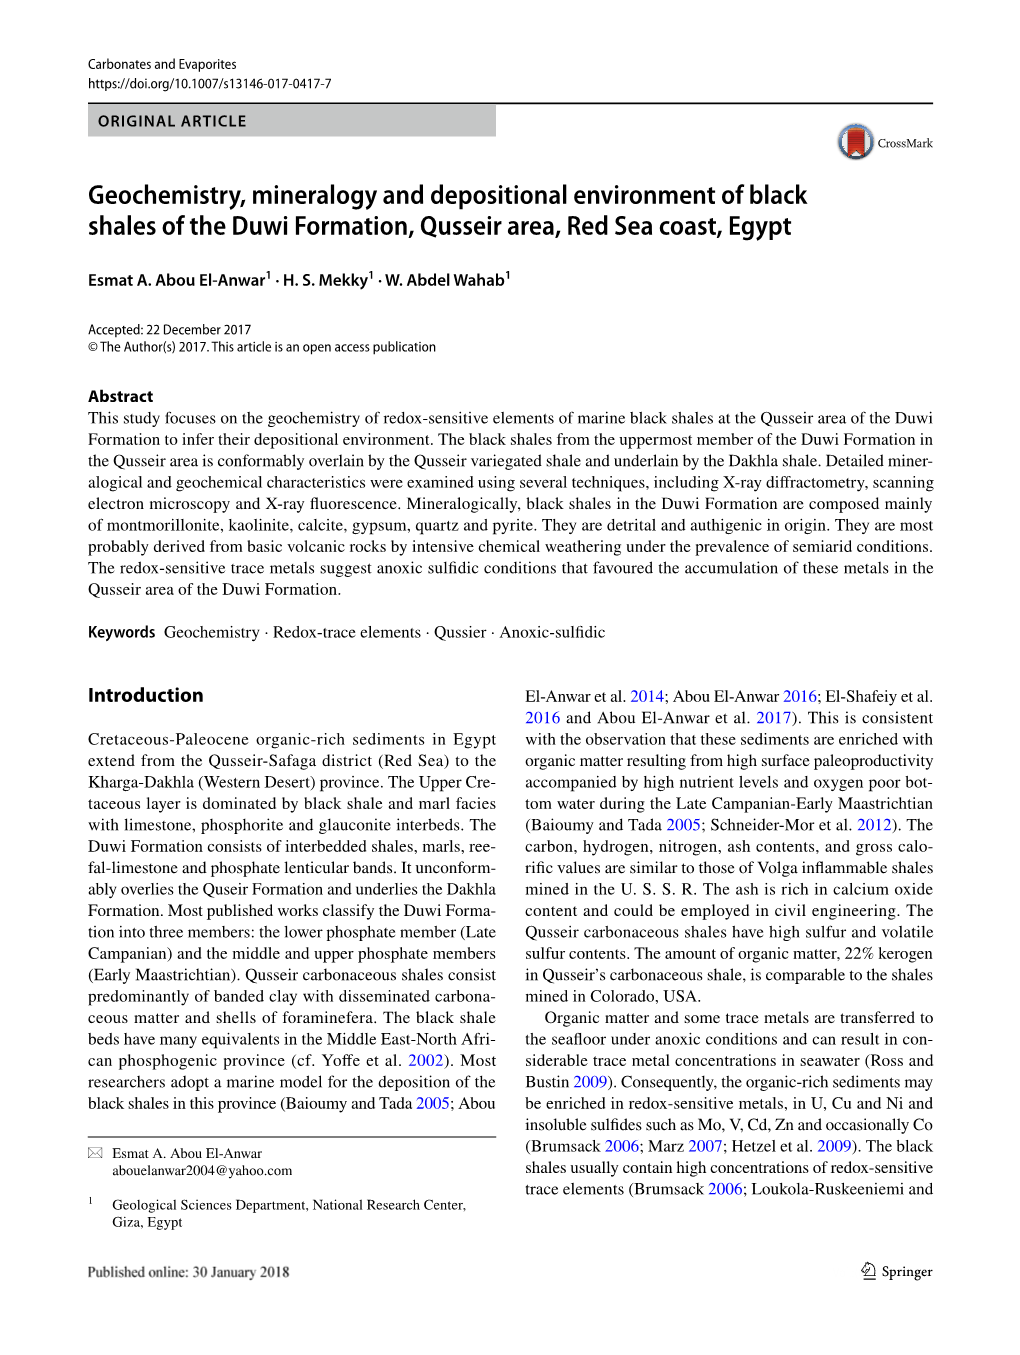 Geochemistry, Mineralogy and Depositional Environment of Black Shales of the Duwi Formation, Qusseir Area, Red Sea Coast, Egypt